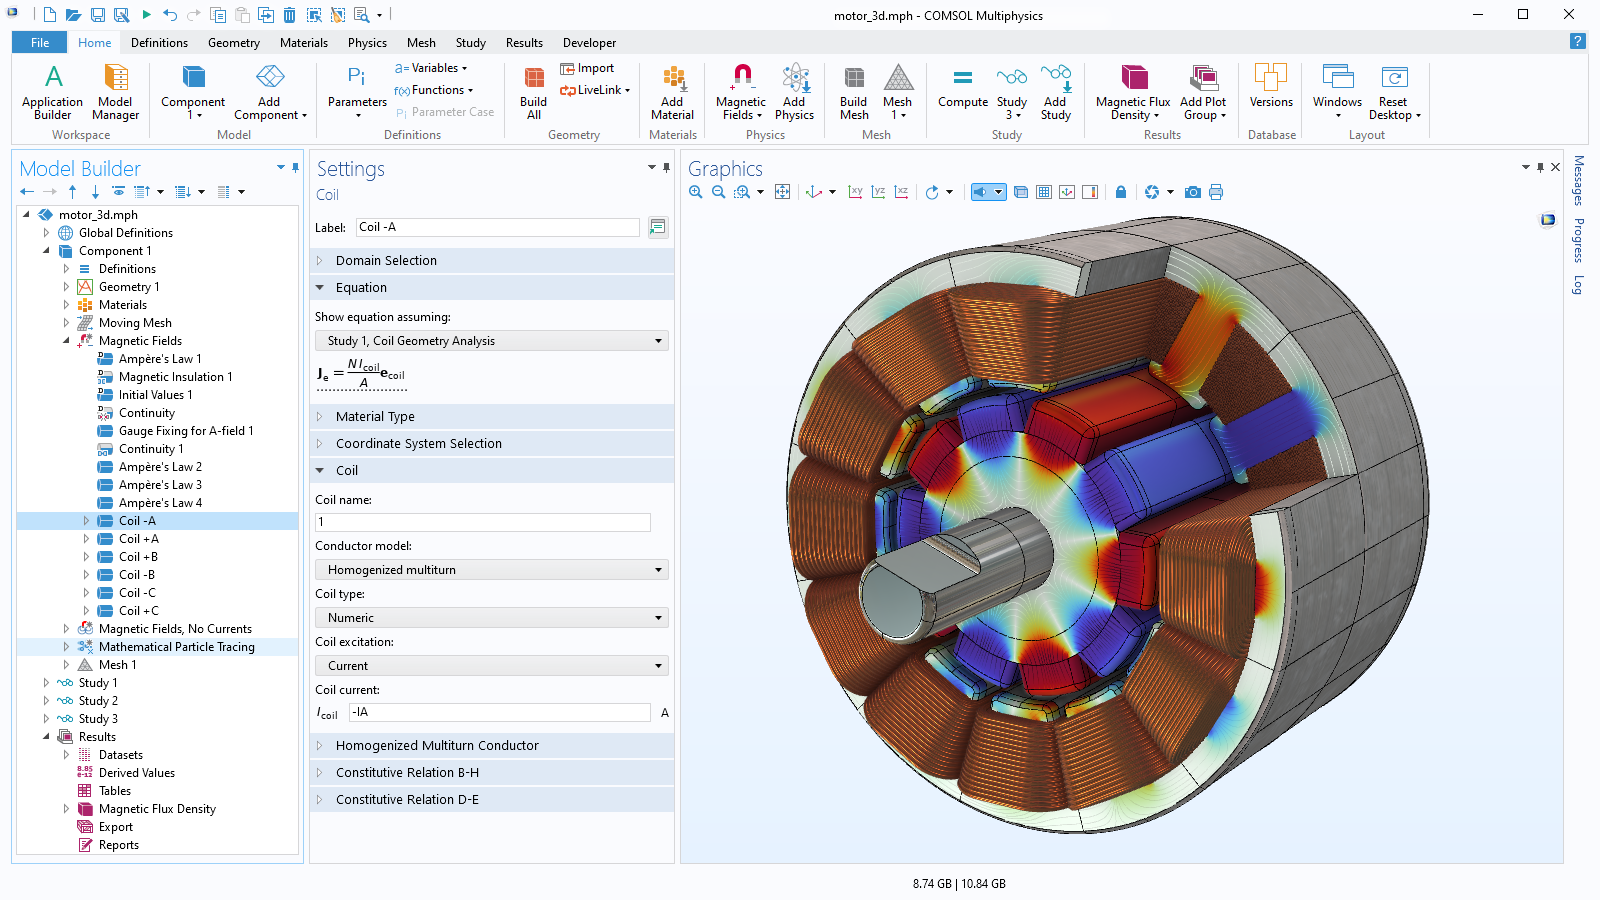 The COMSOL Multiphysics UI showing the Model Builder with a Coil node highlighted, the corresponding Settings window, and a permanent magnet motor model in the Graphics window.